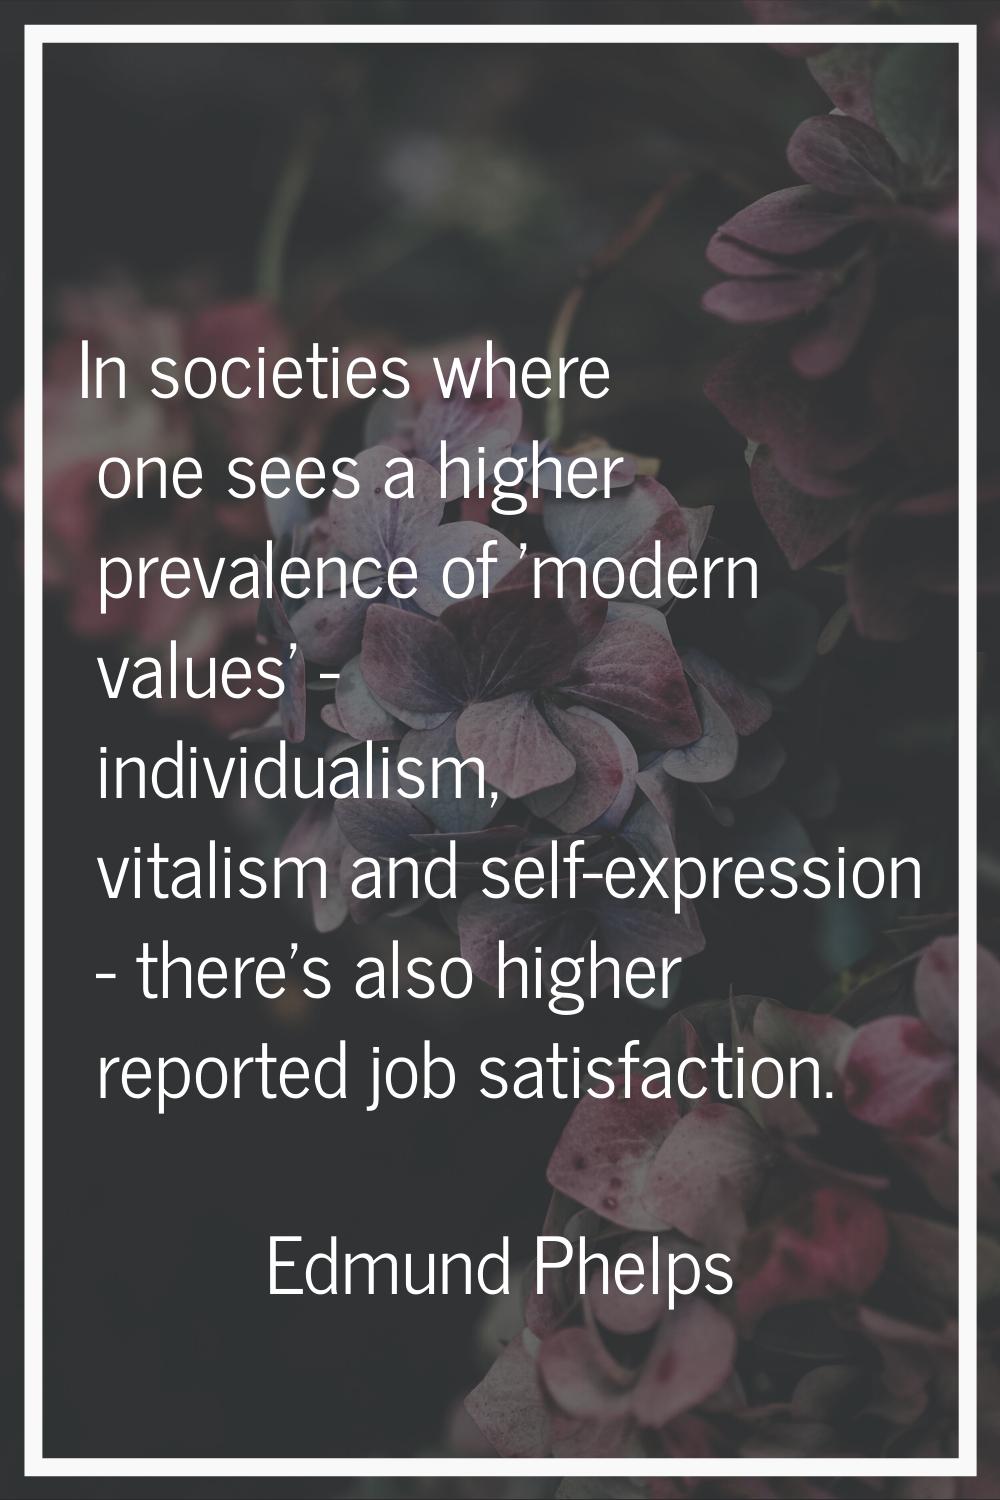 In societies where one sees a higher prevalence of 'modern values' - individualism, vitalism and se